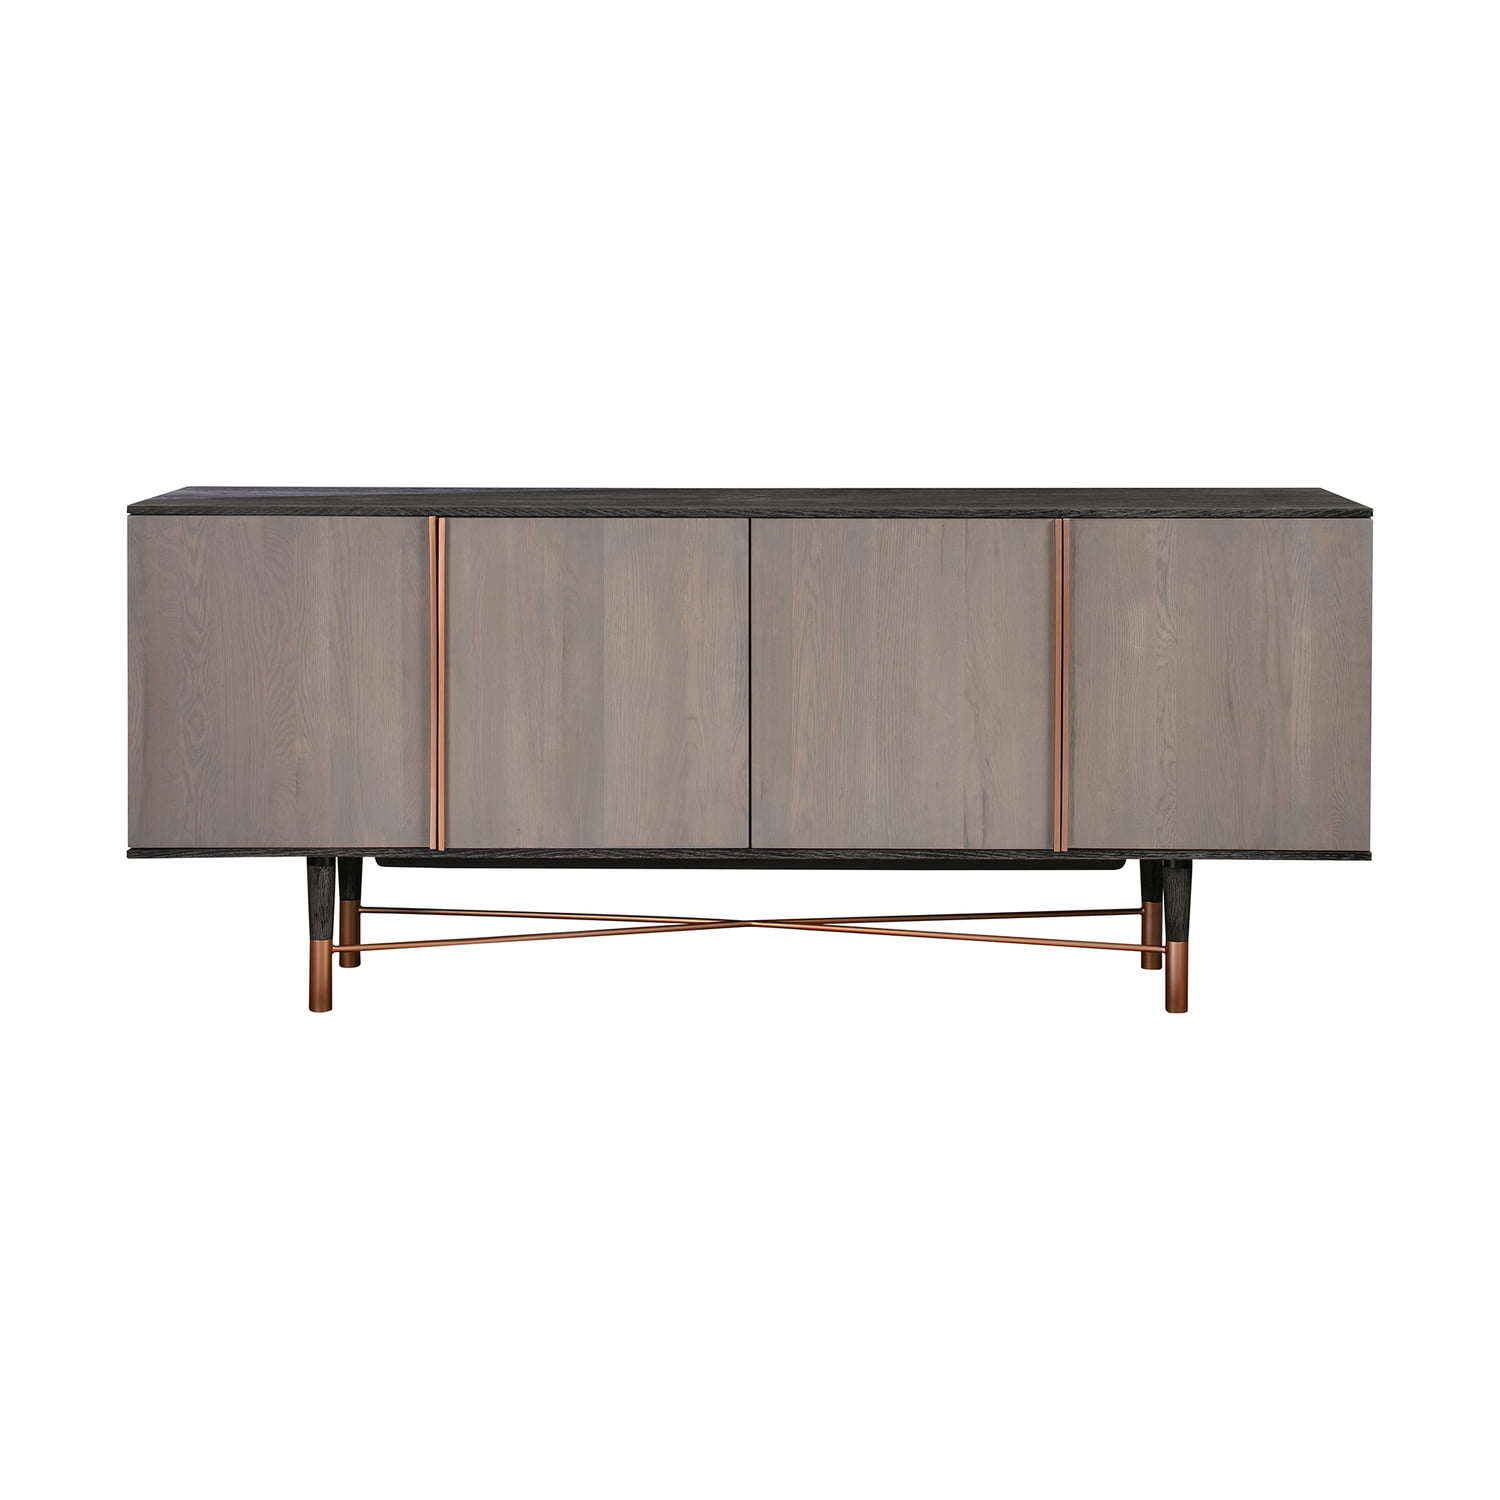 Picture of Armen Living LCTNBUBL Turin Rustic Oak Wood Sideboard Cabinet with Copper Accent